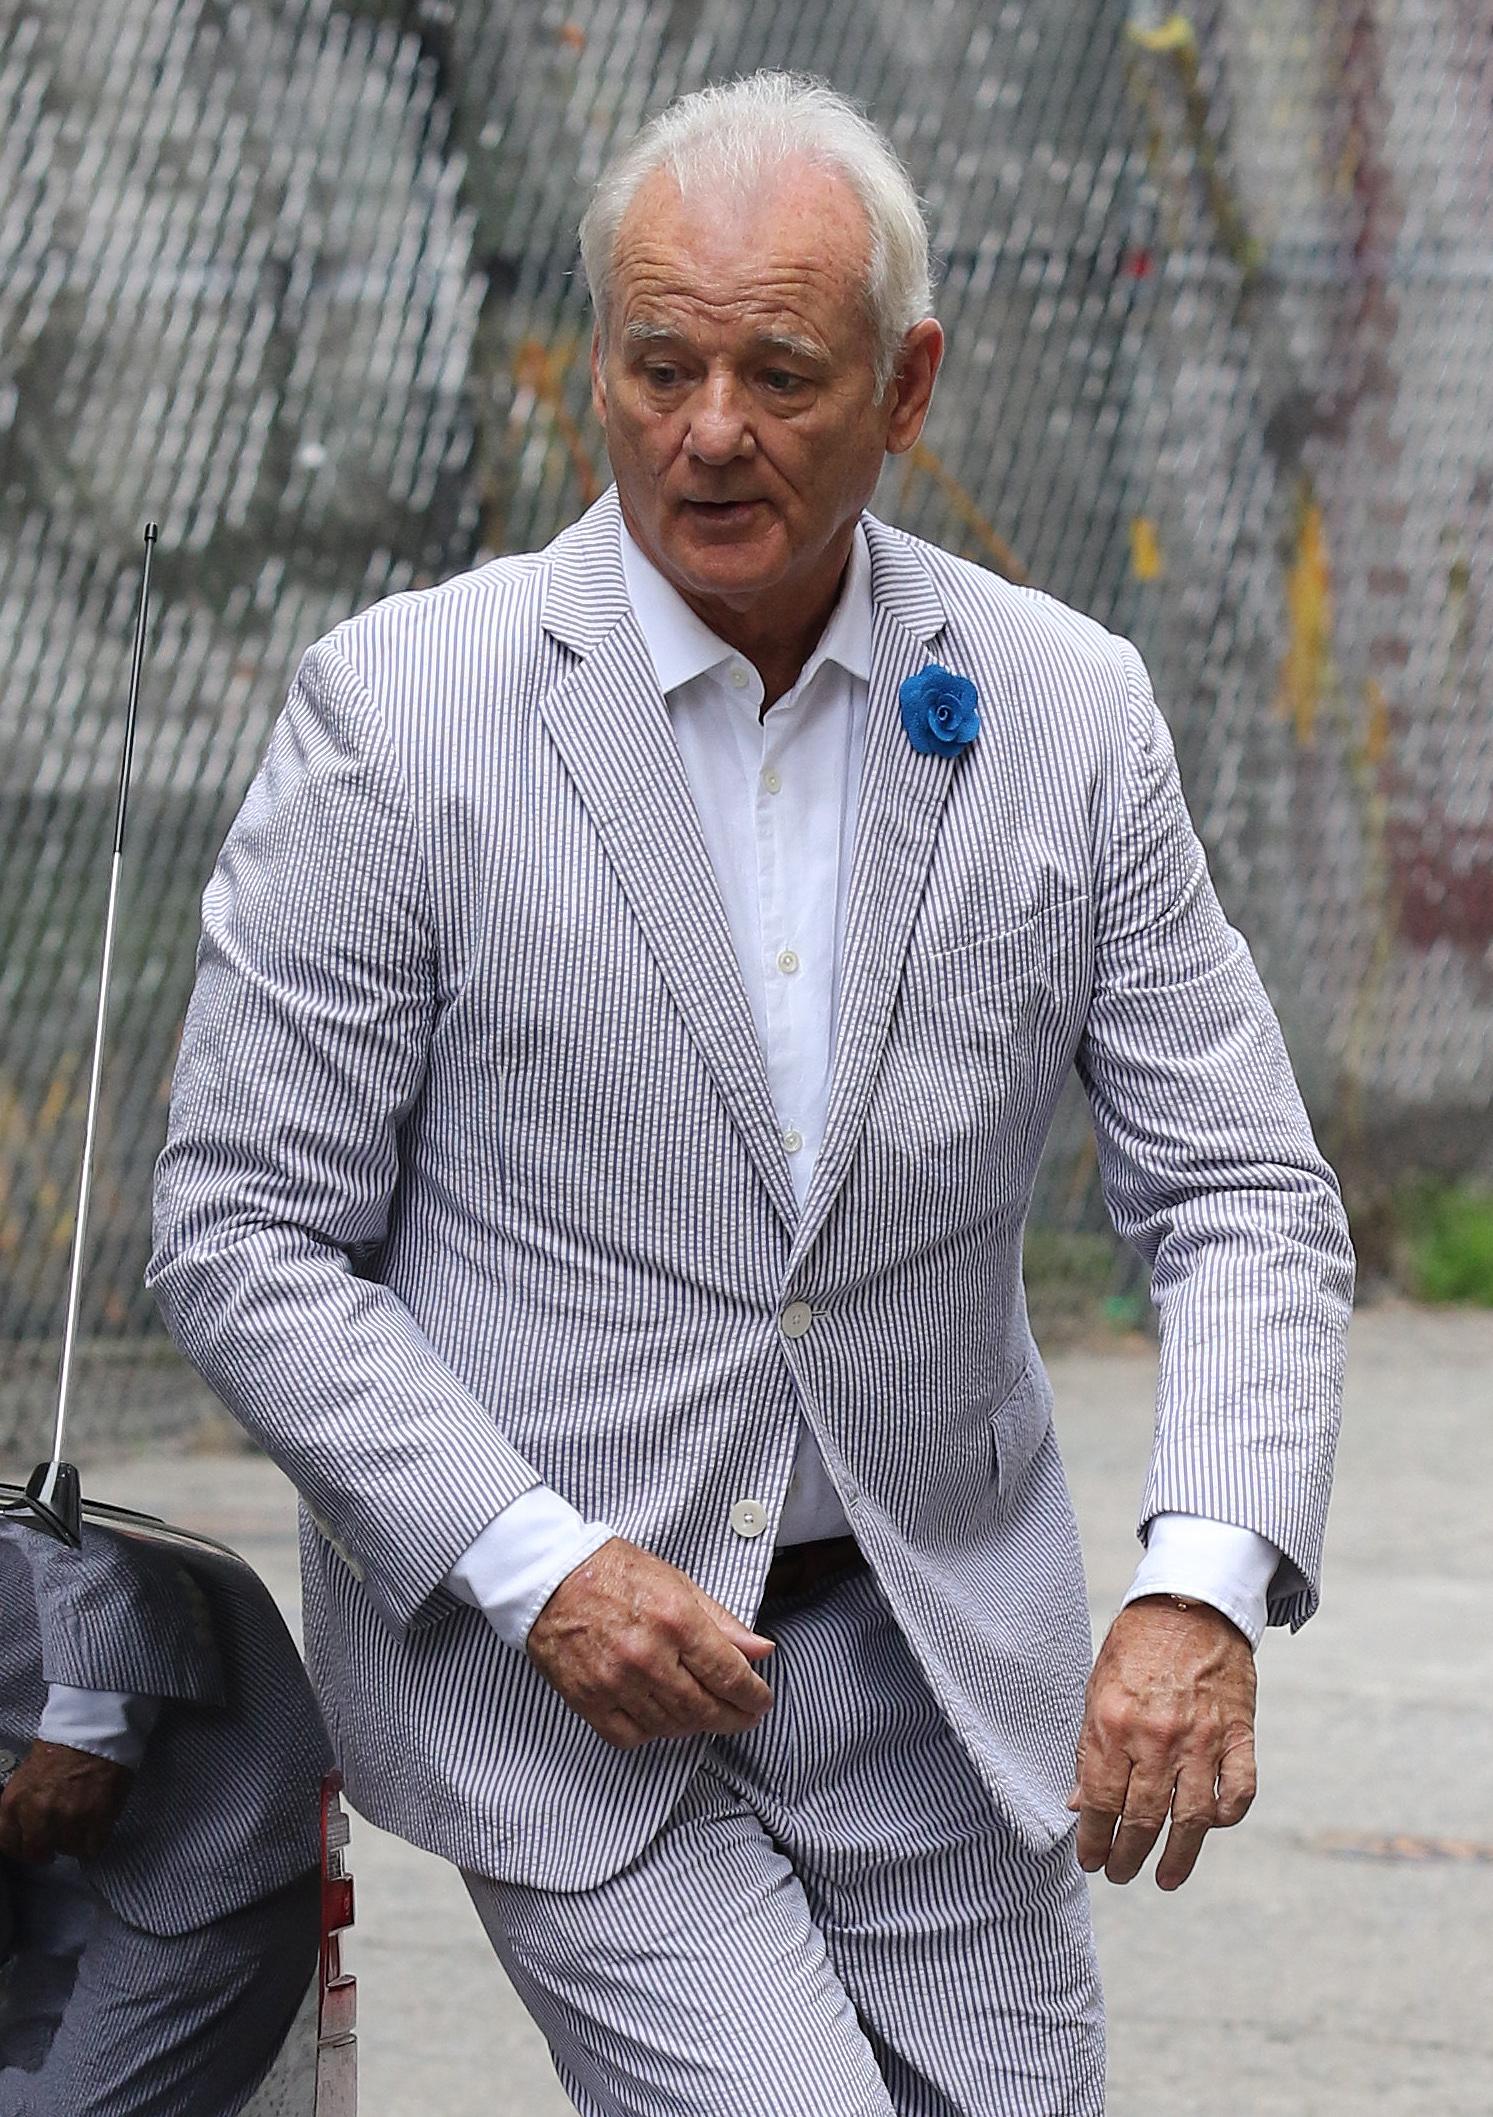 Bill Murray kisses on-screen daughter Rashida Jones on the forehead while filming quot ON THE ROCKS quot in New York City